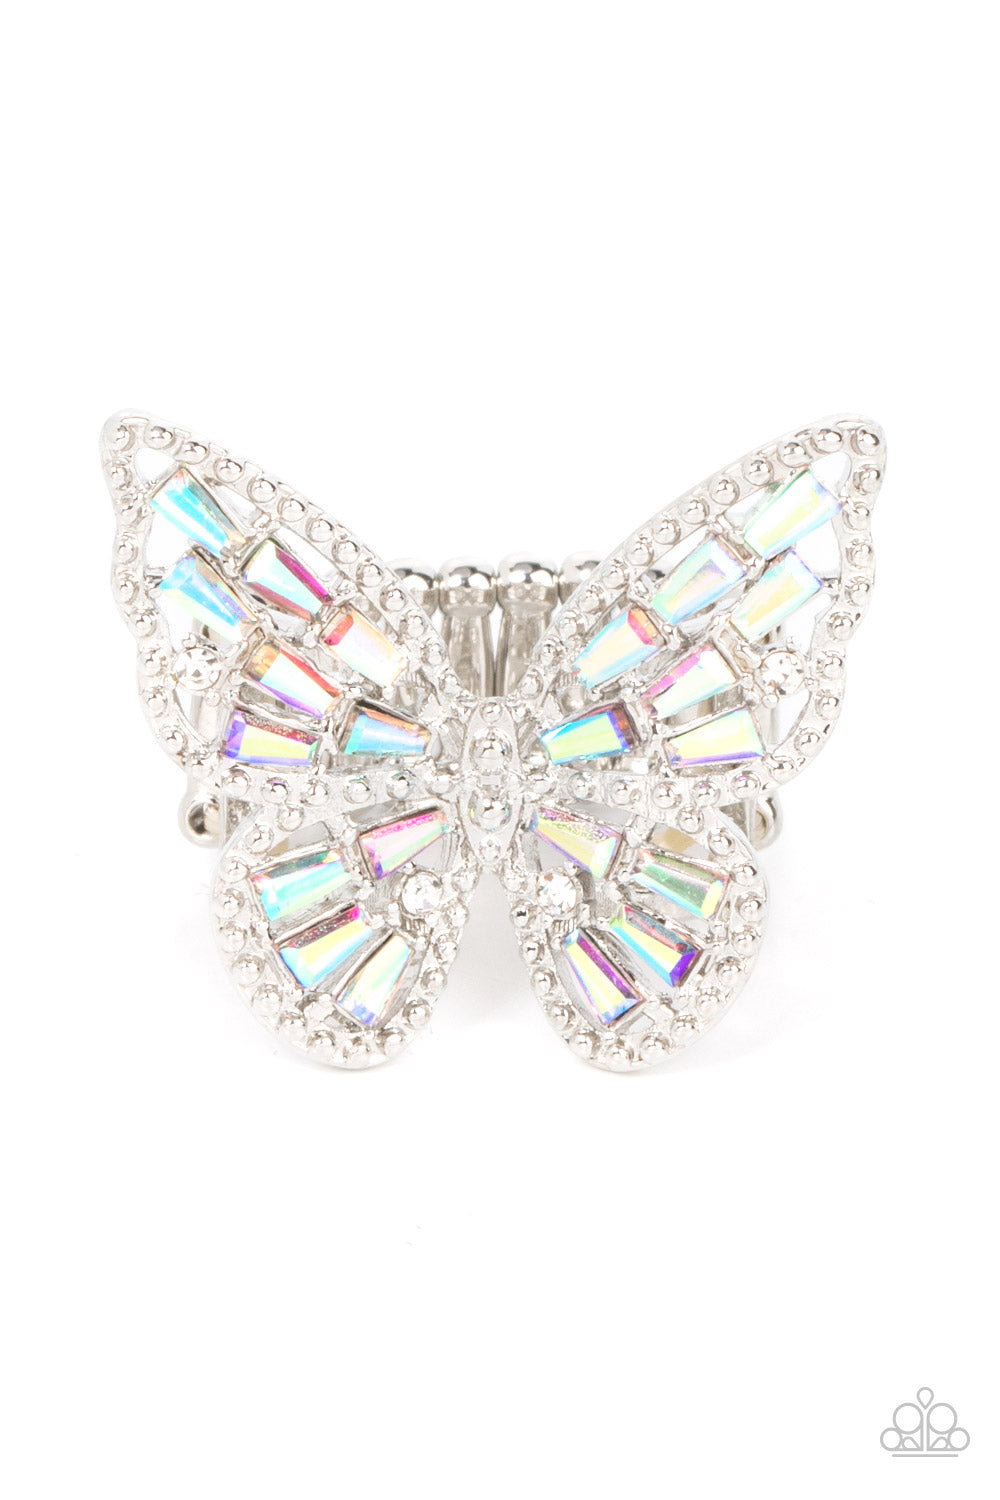 A glitzy collection of emerald cut iridescent rhinestones are sprinkled across the studded wings of a shiny silver butterfly, resulting in a whimsical centerpiece atop the finger. Features a stretchy band for a flexible fit.  Sold as one individual ring.